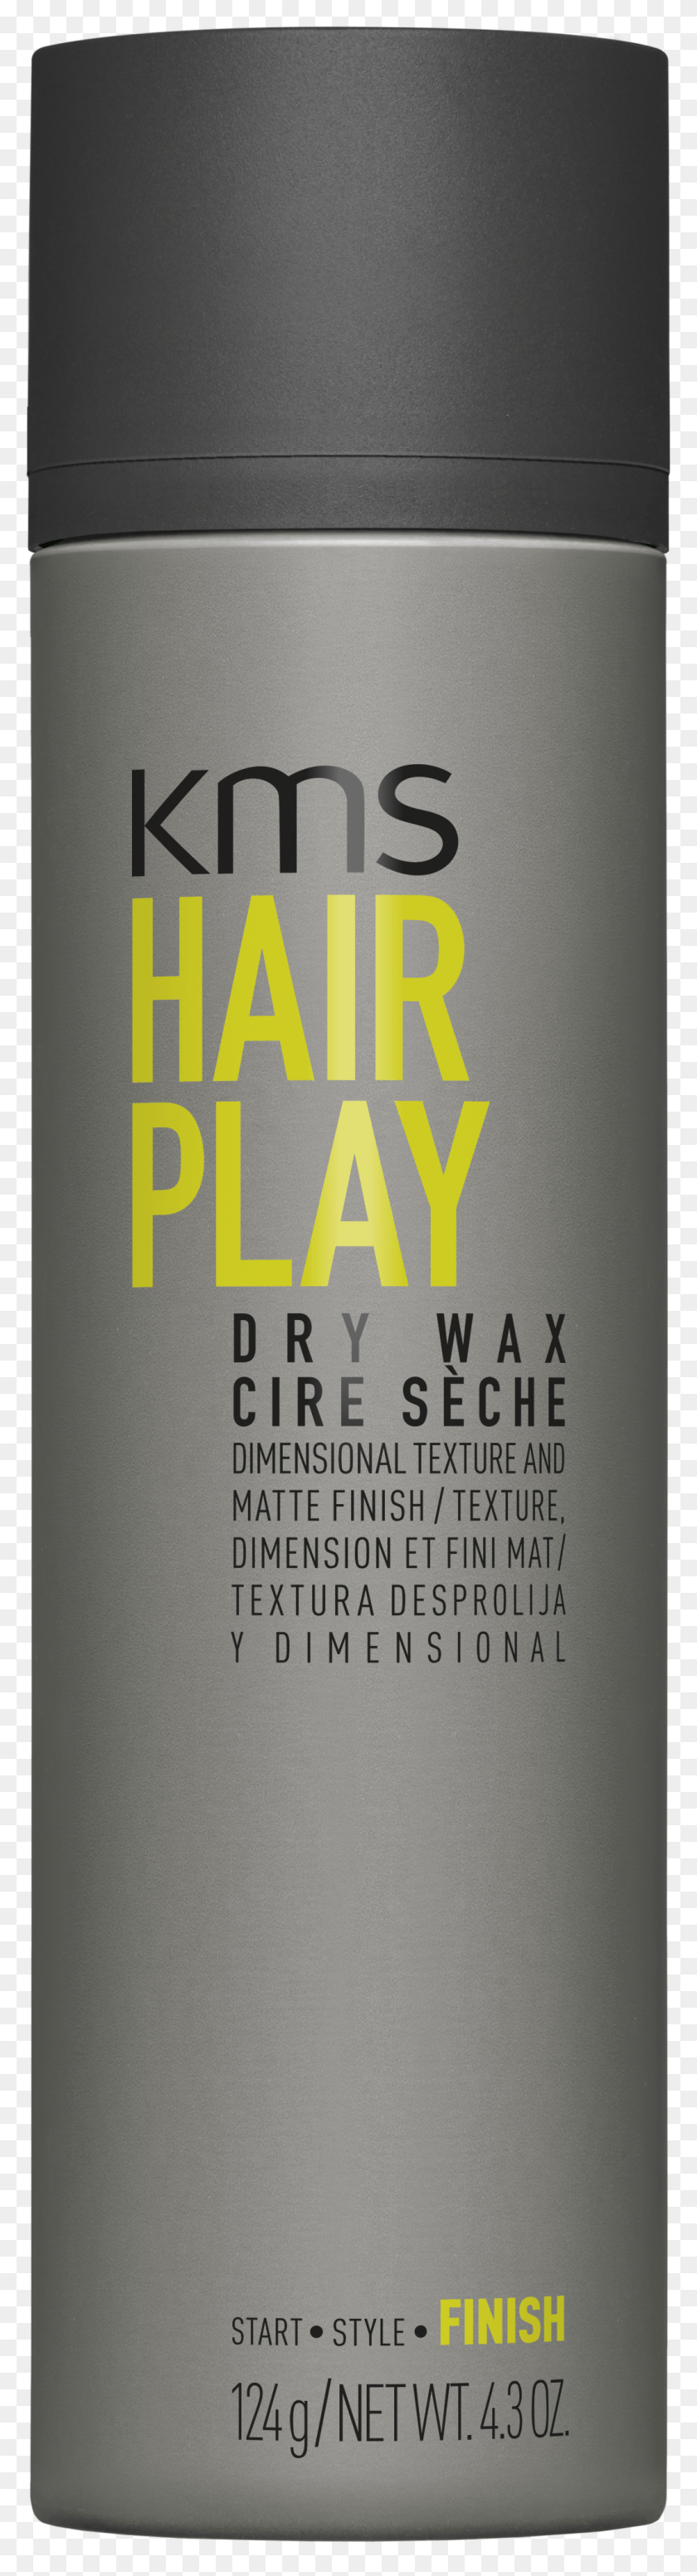 1064x4155 Descargar Png Producto Kms California Hairplay Dry Wax Hd Png